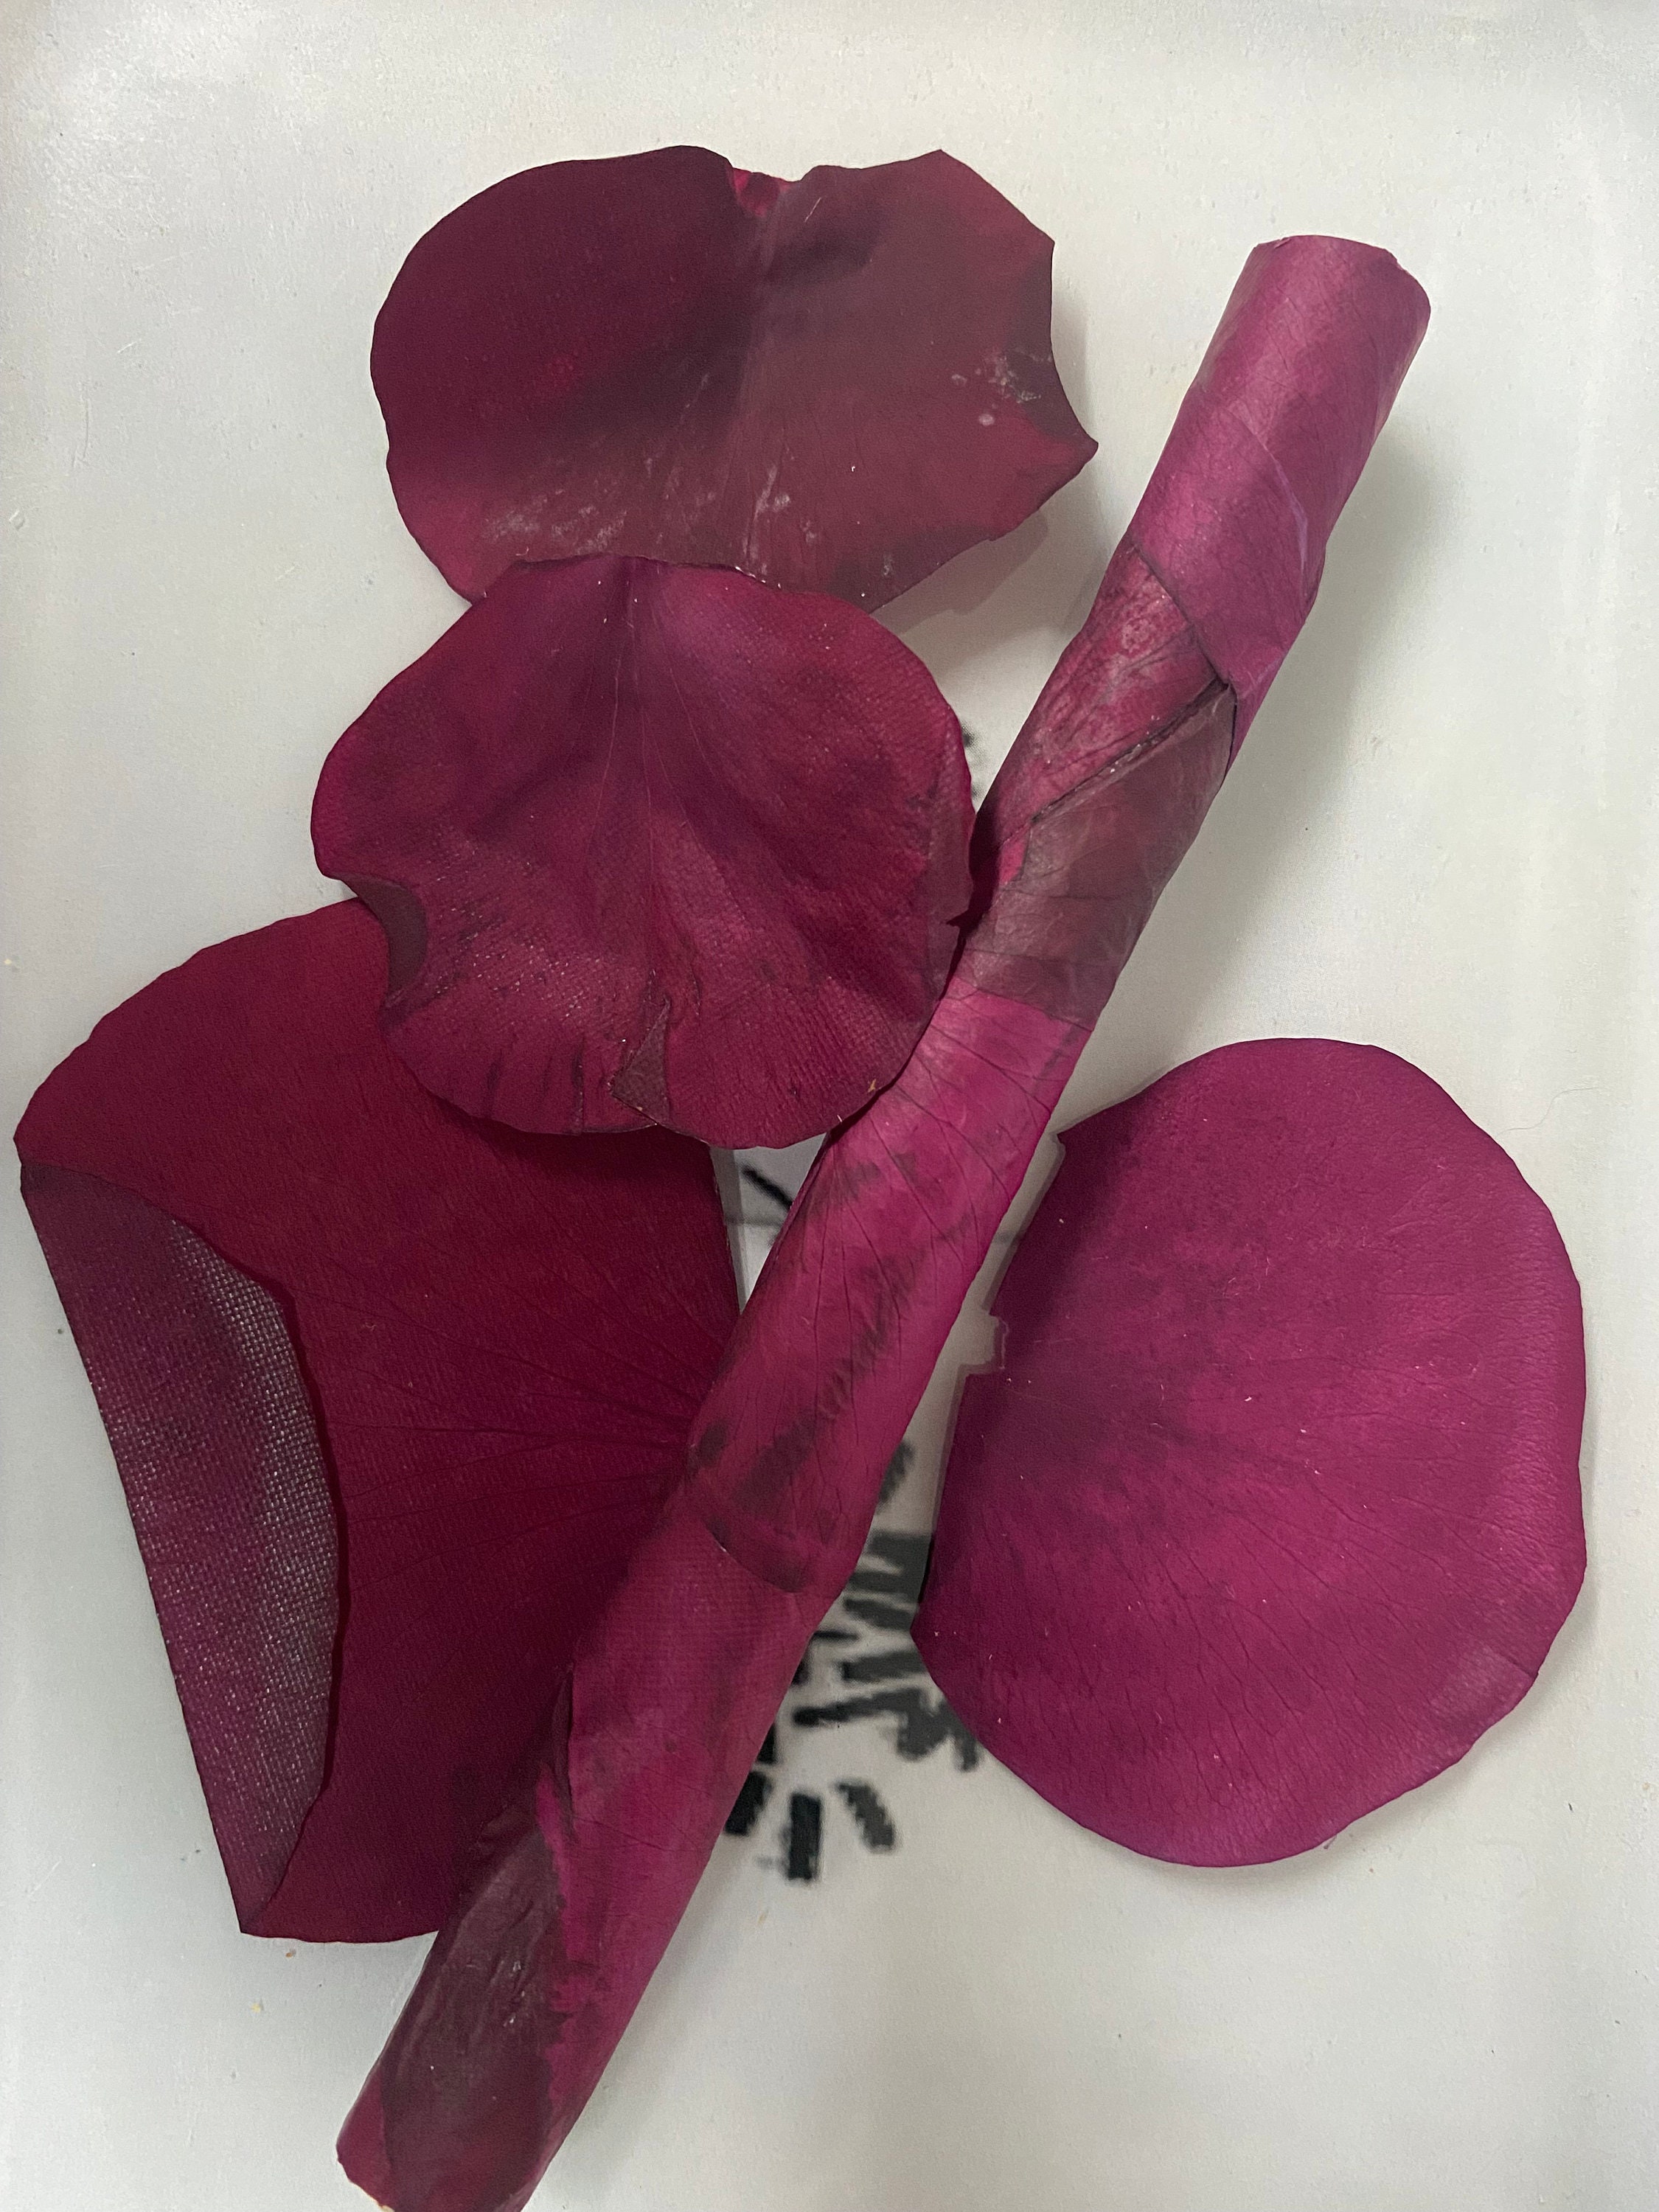 Rose Palms Rose Cones Wraps Flower Petal Prerolled Cone | 6 Cones | Natural  Organic Rose Petal Handrolled Cones Unrefined, Earthy, Organically Scented